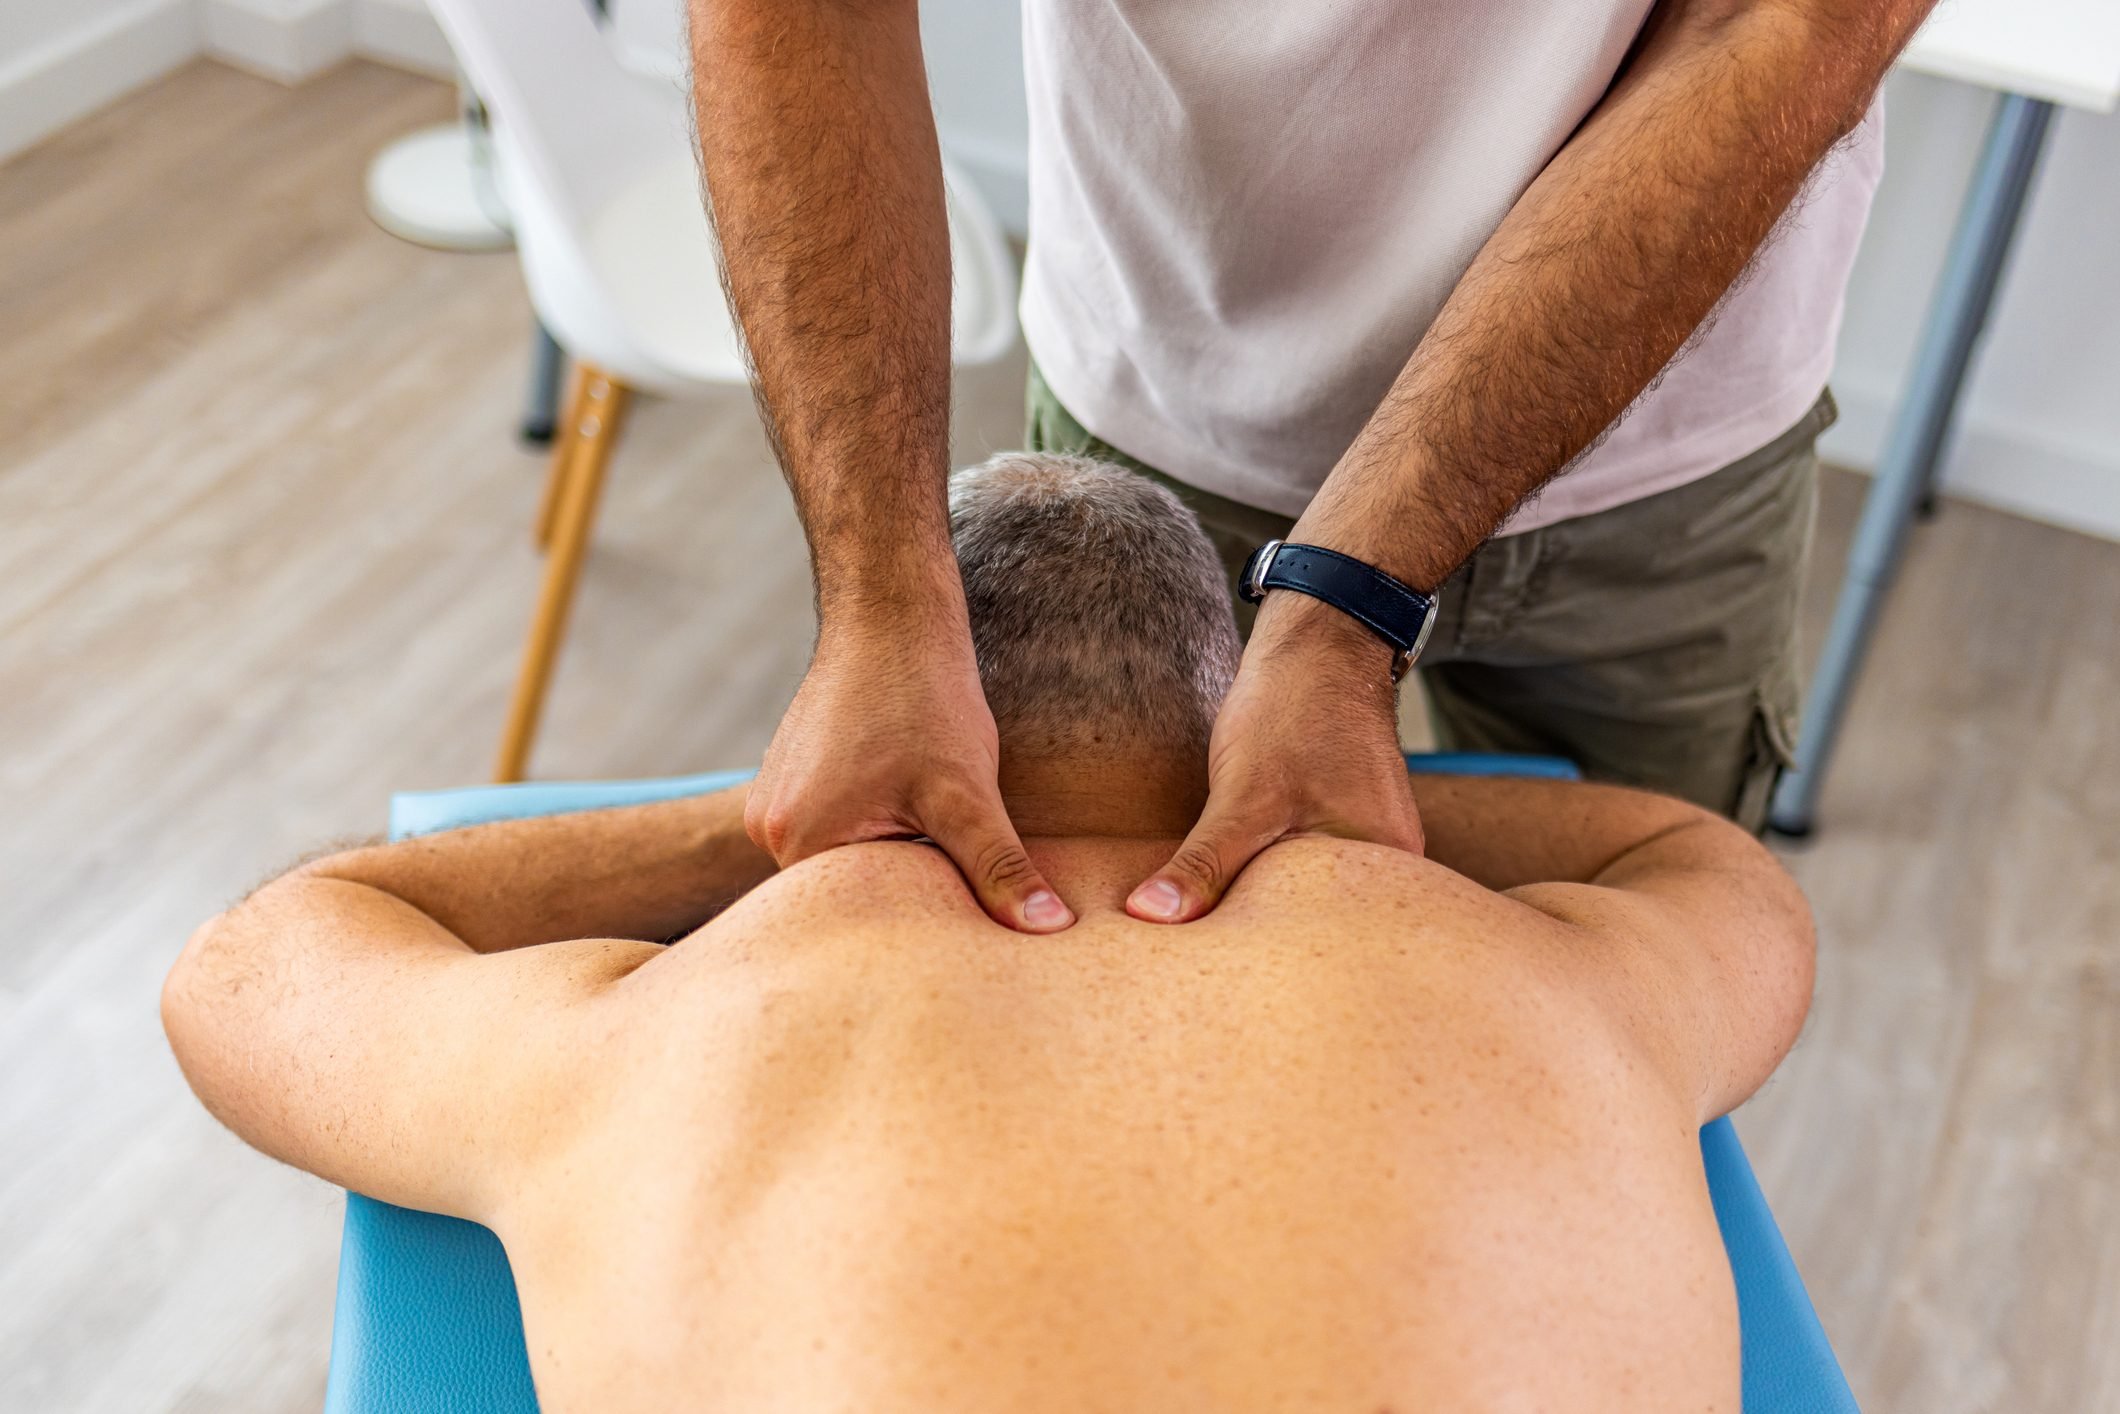 How Much to Tip for a Massage in 2023, According to Experts